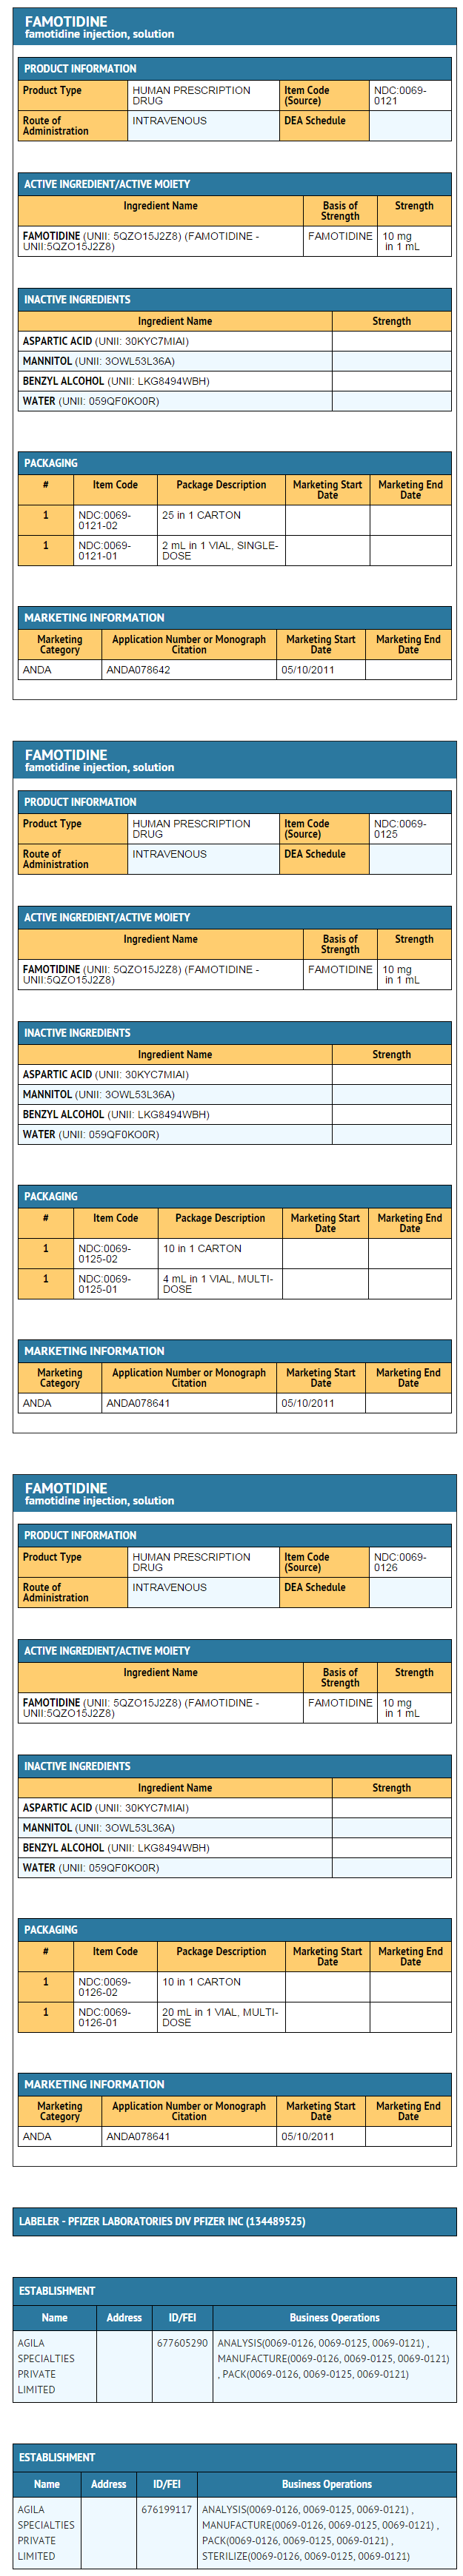 File:Famotidine (injection)07.png